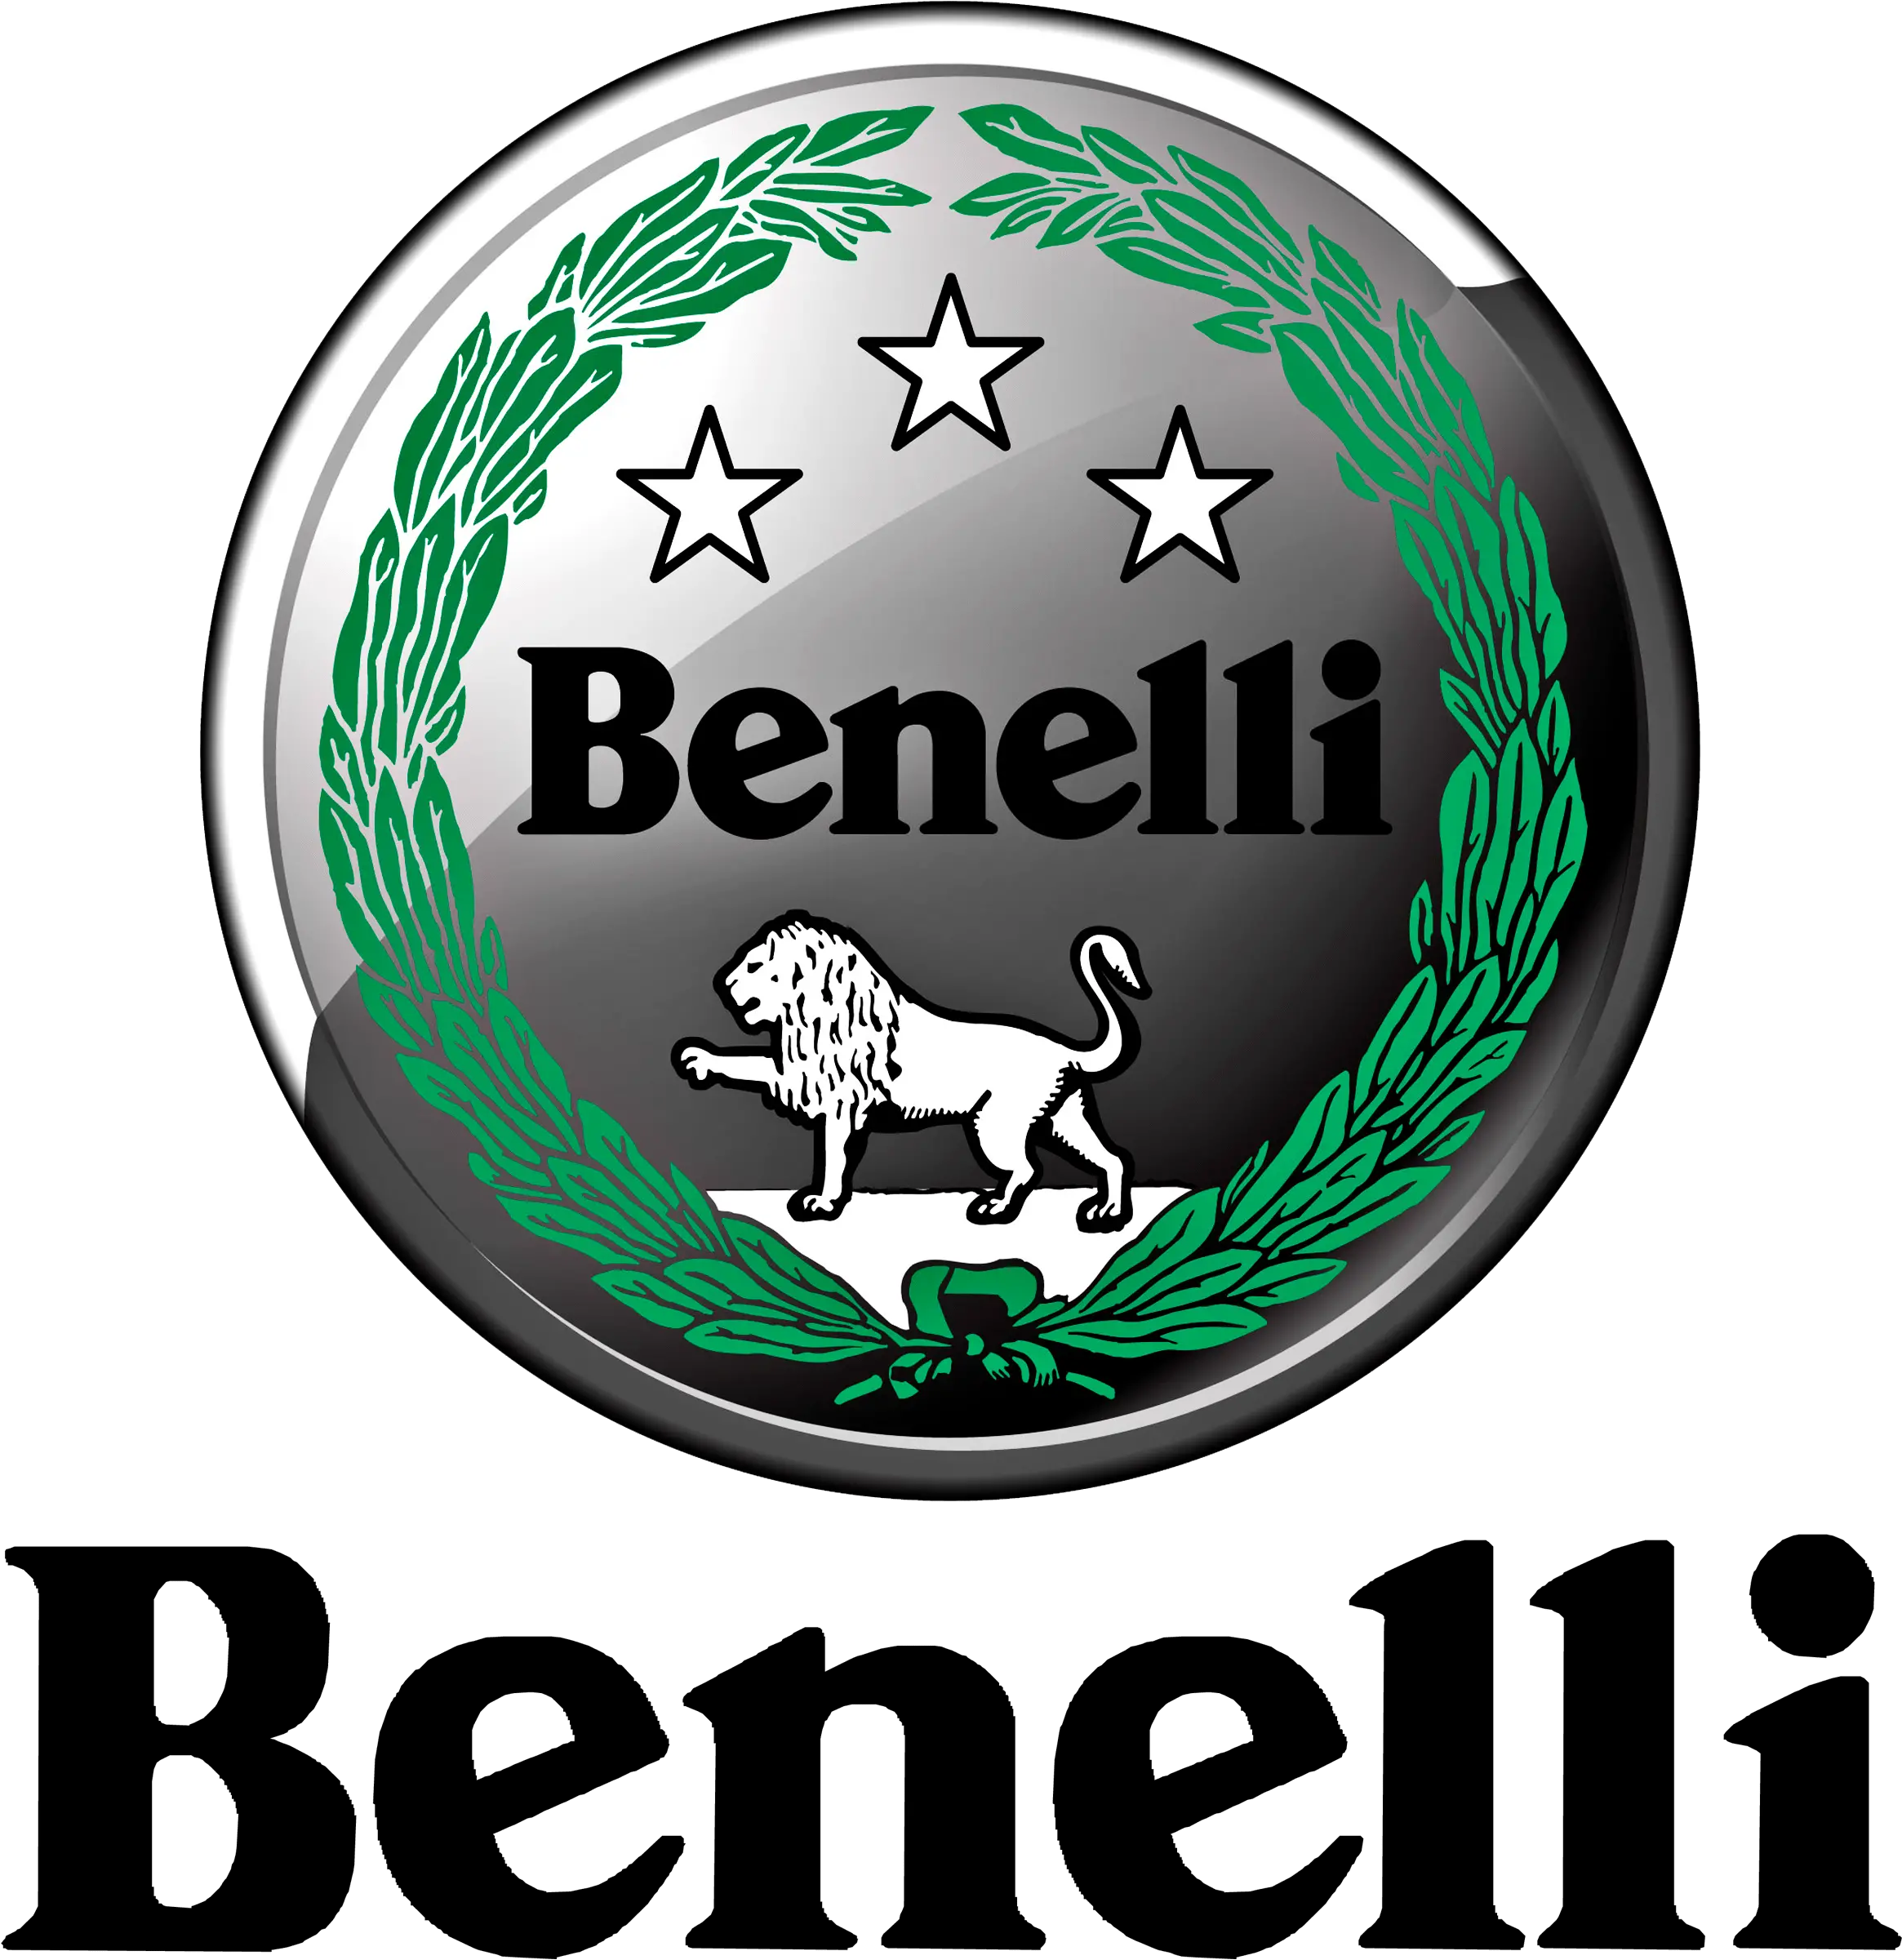 Benelli Motorcycle Logo History And Benelli Png Cubic Logos